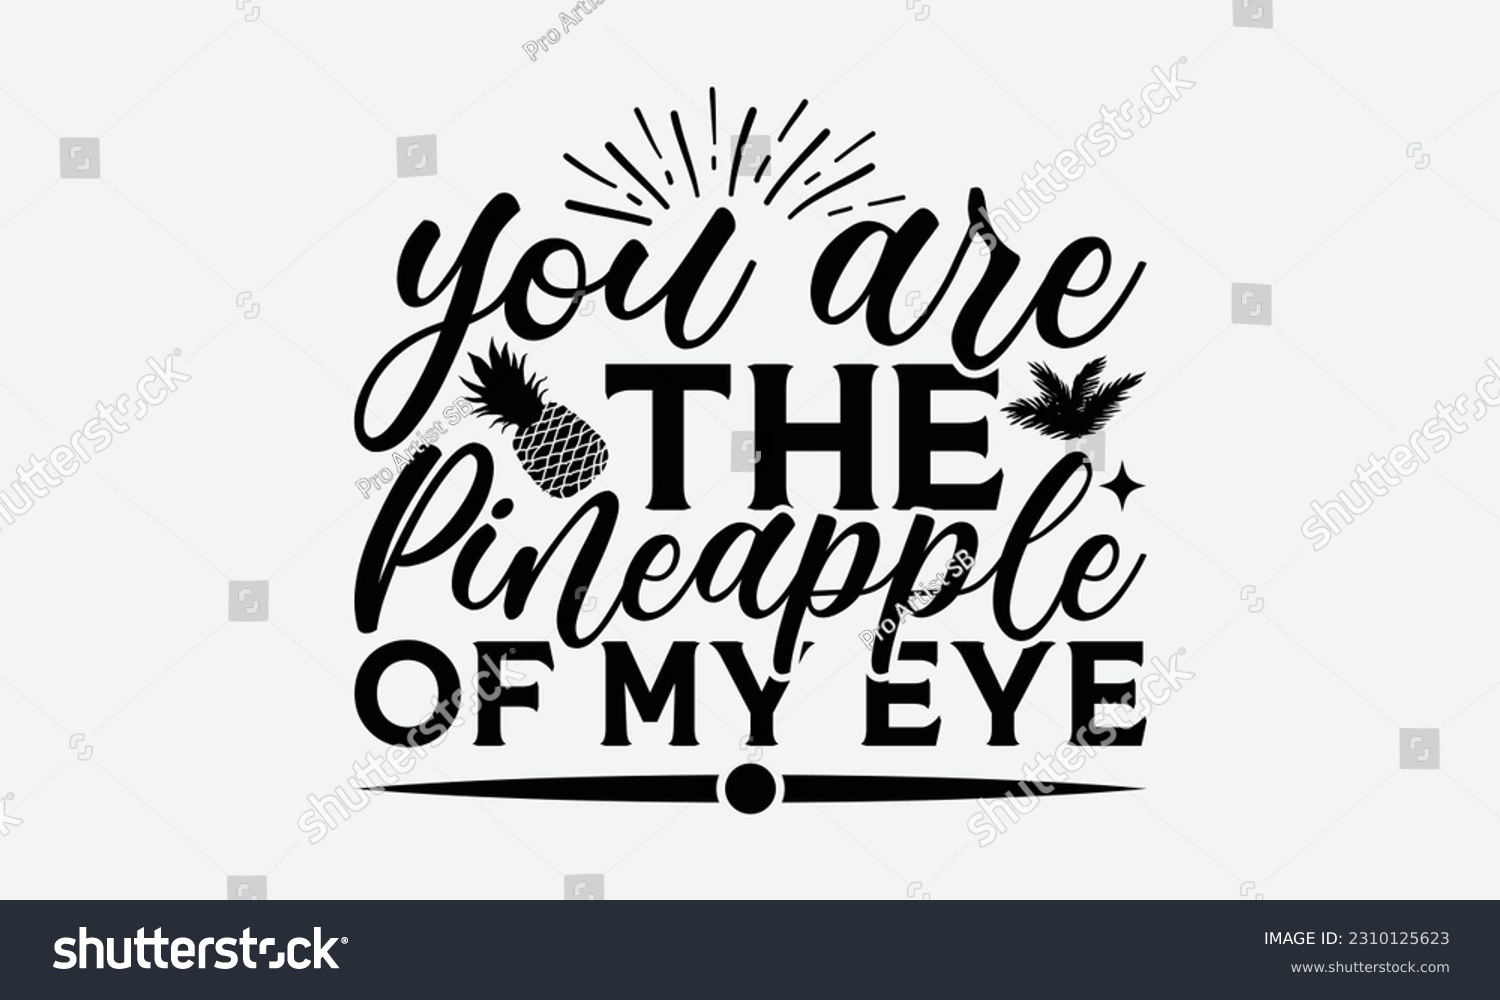 SVG of You Are The Pineapple Of My Eye - Summer T-shirt Design, Beach Quotes, Summer Quotes SVG, Typography Poster Design Vector File, Hand Drawn Vintage Hand Lettering. svg